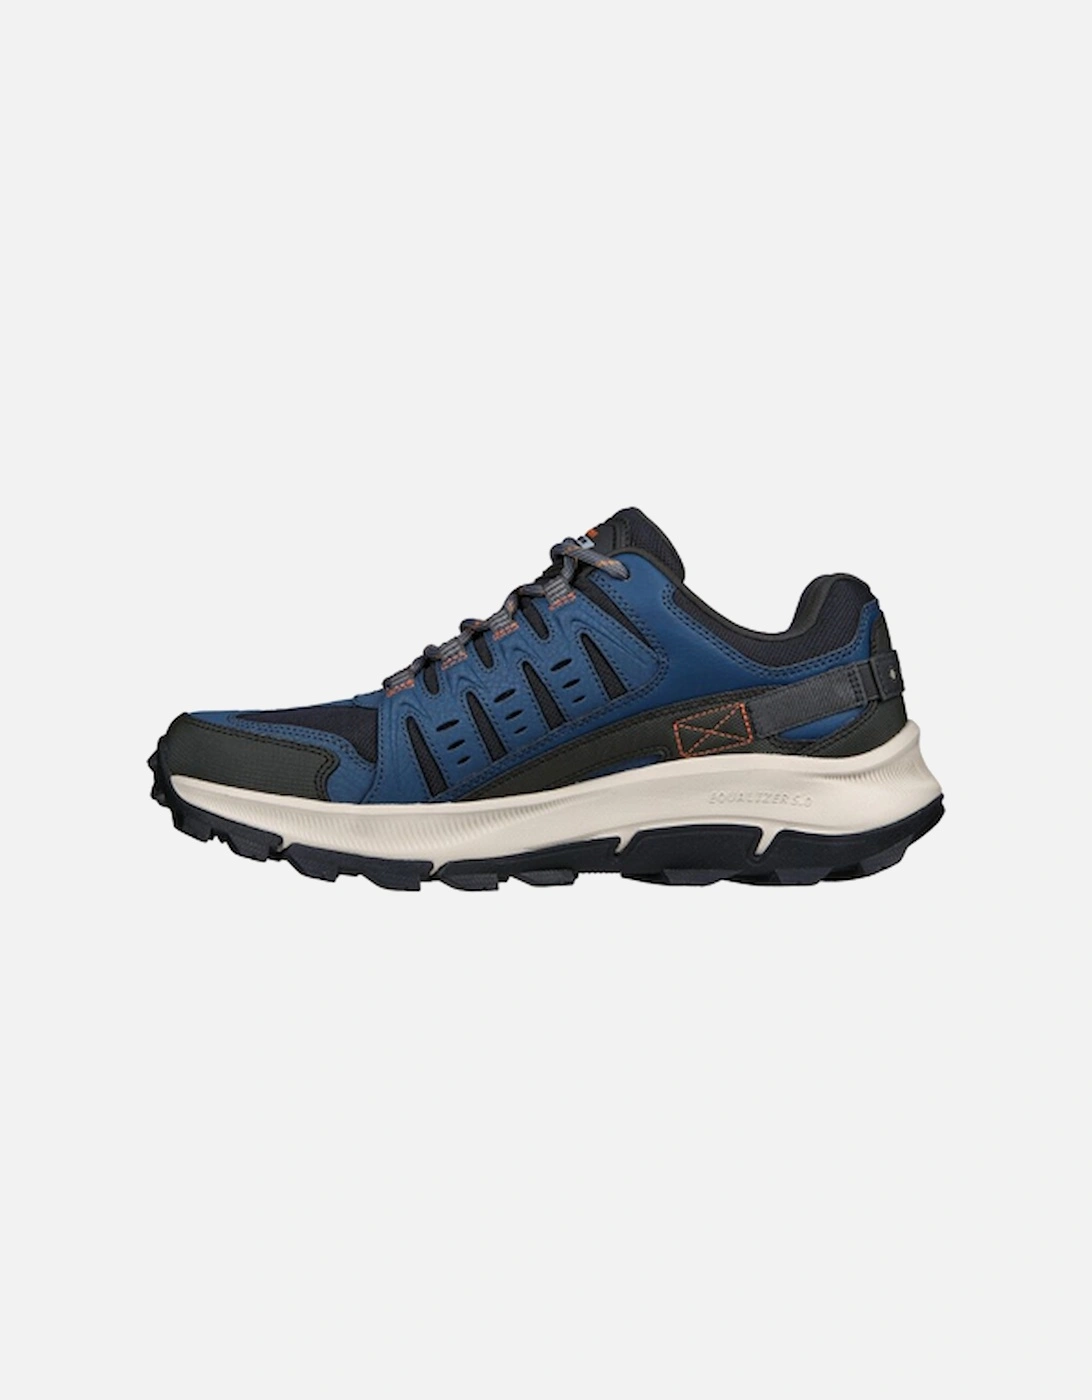 Men's Relaxed Fit Equalizer 5.0 Trail Solix Navy / Orange